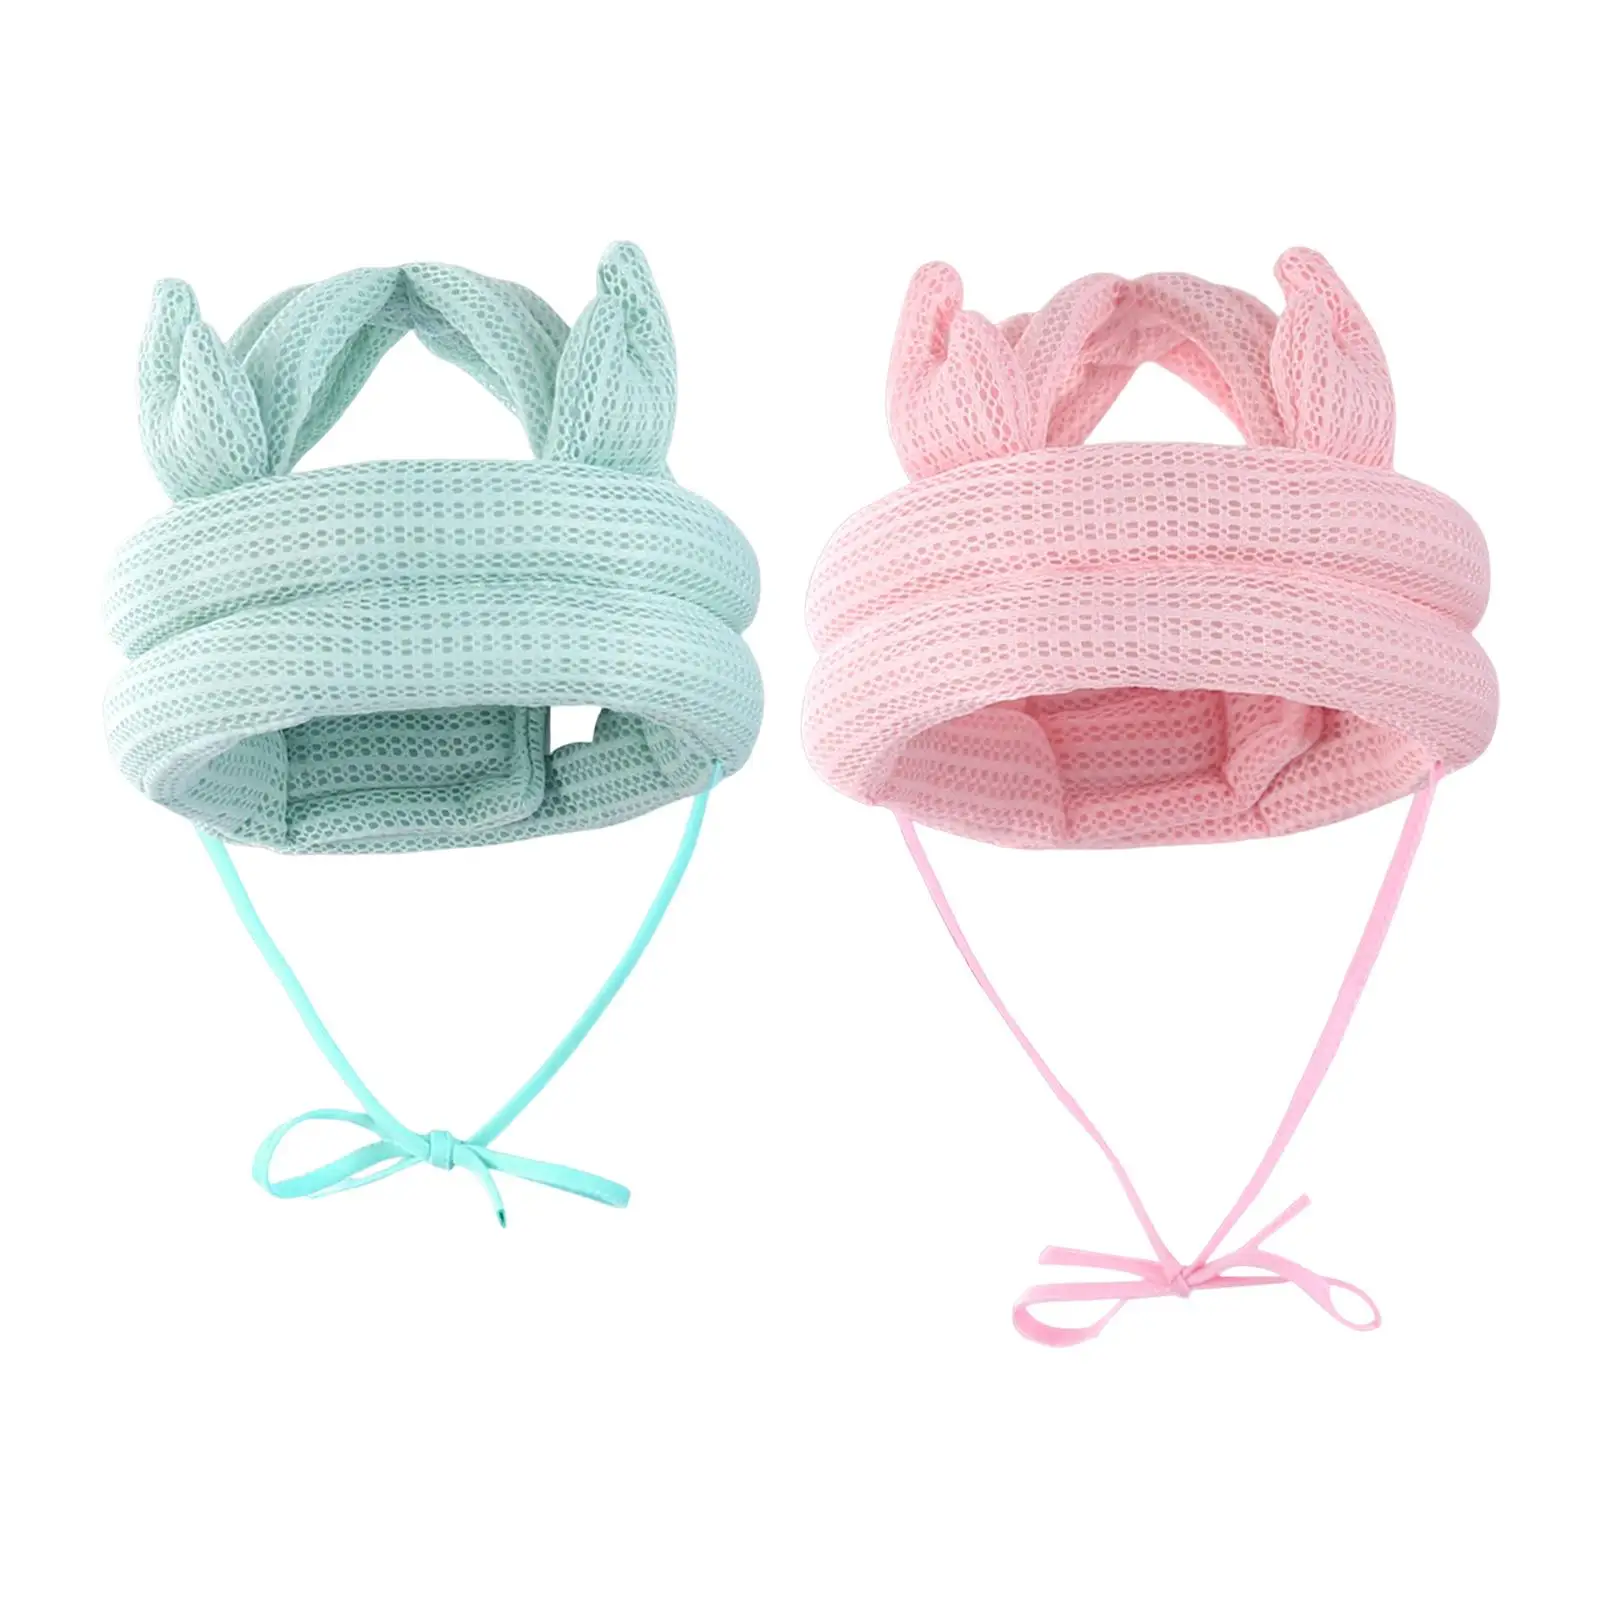 Baby Protective Cap Comfortable Portable Infant Head Protective Hat Baby Hat for 0-5 Years Old Children Boys Girls Kids Running